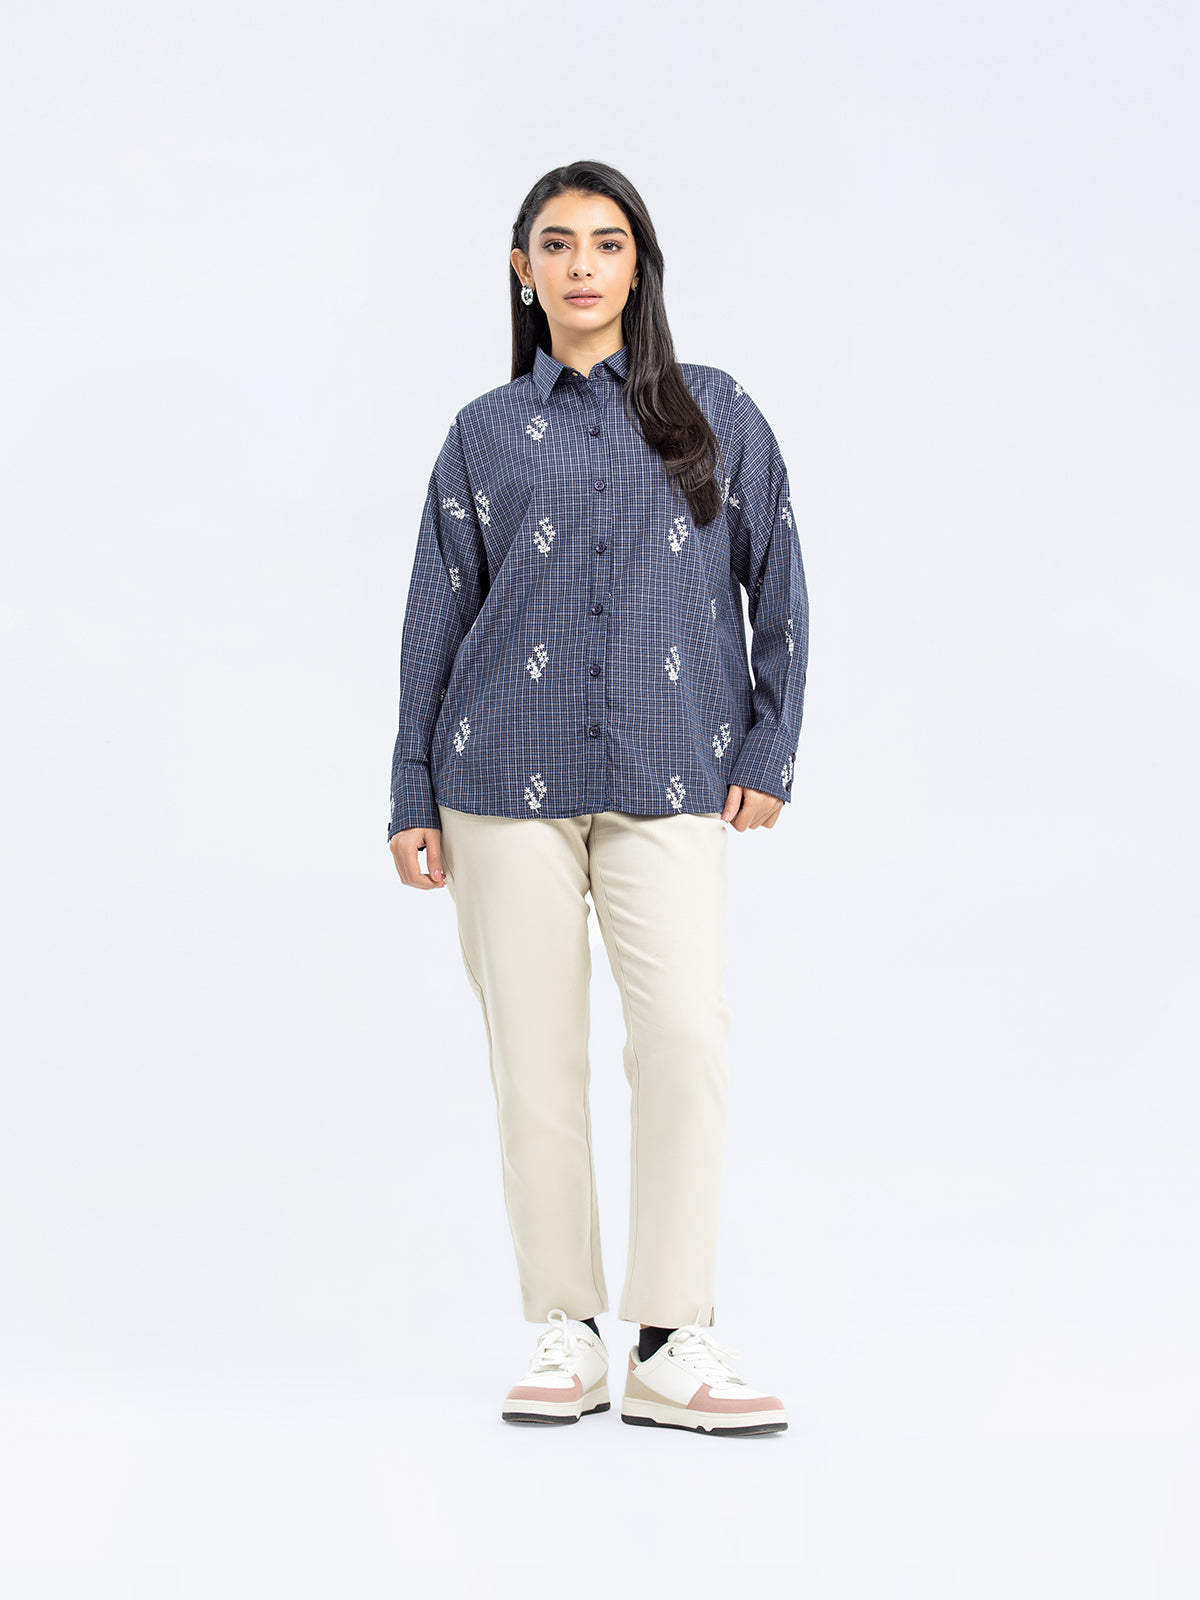 Embroidered Button Up Shirt - FWTS23-132